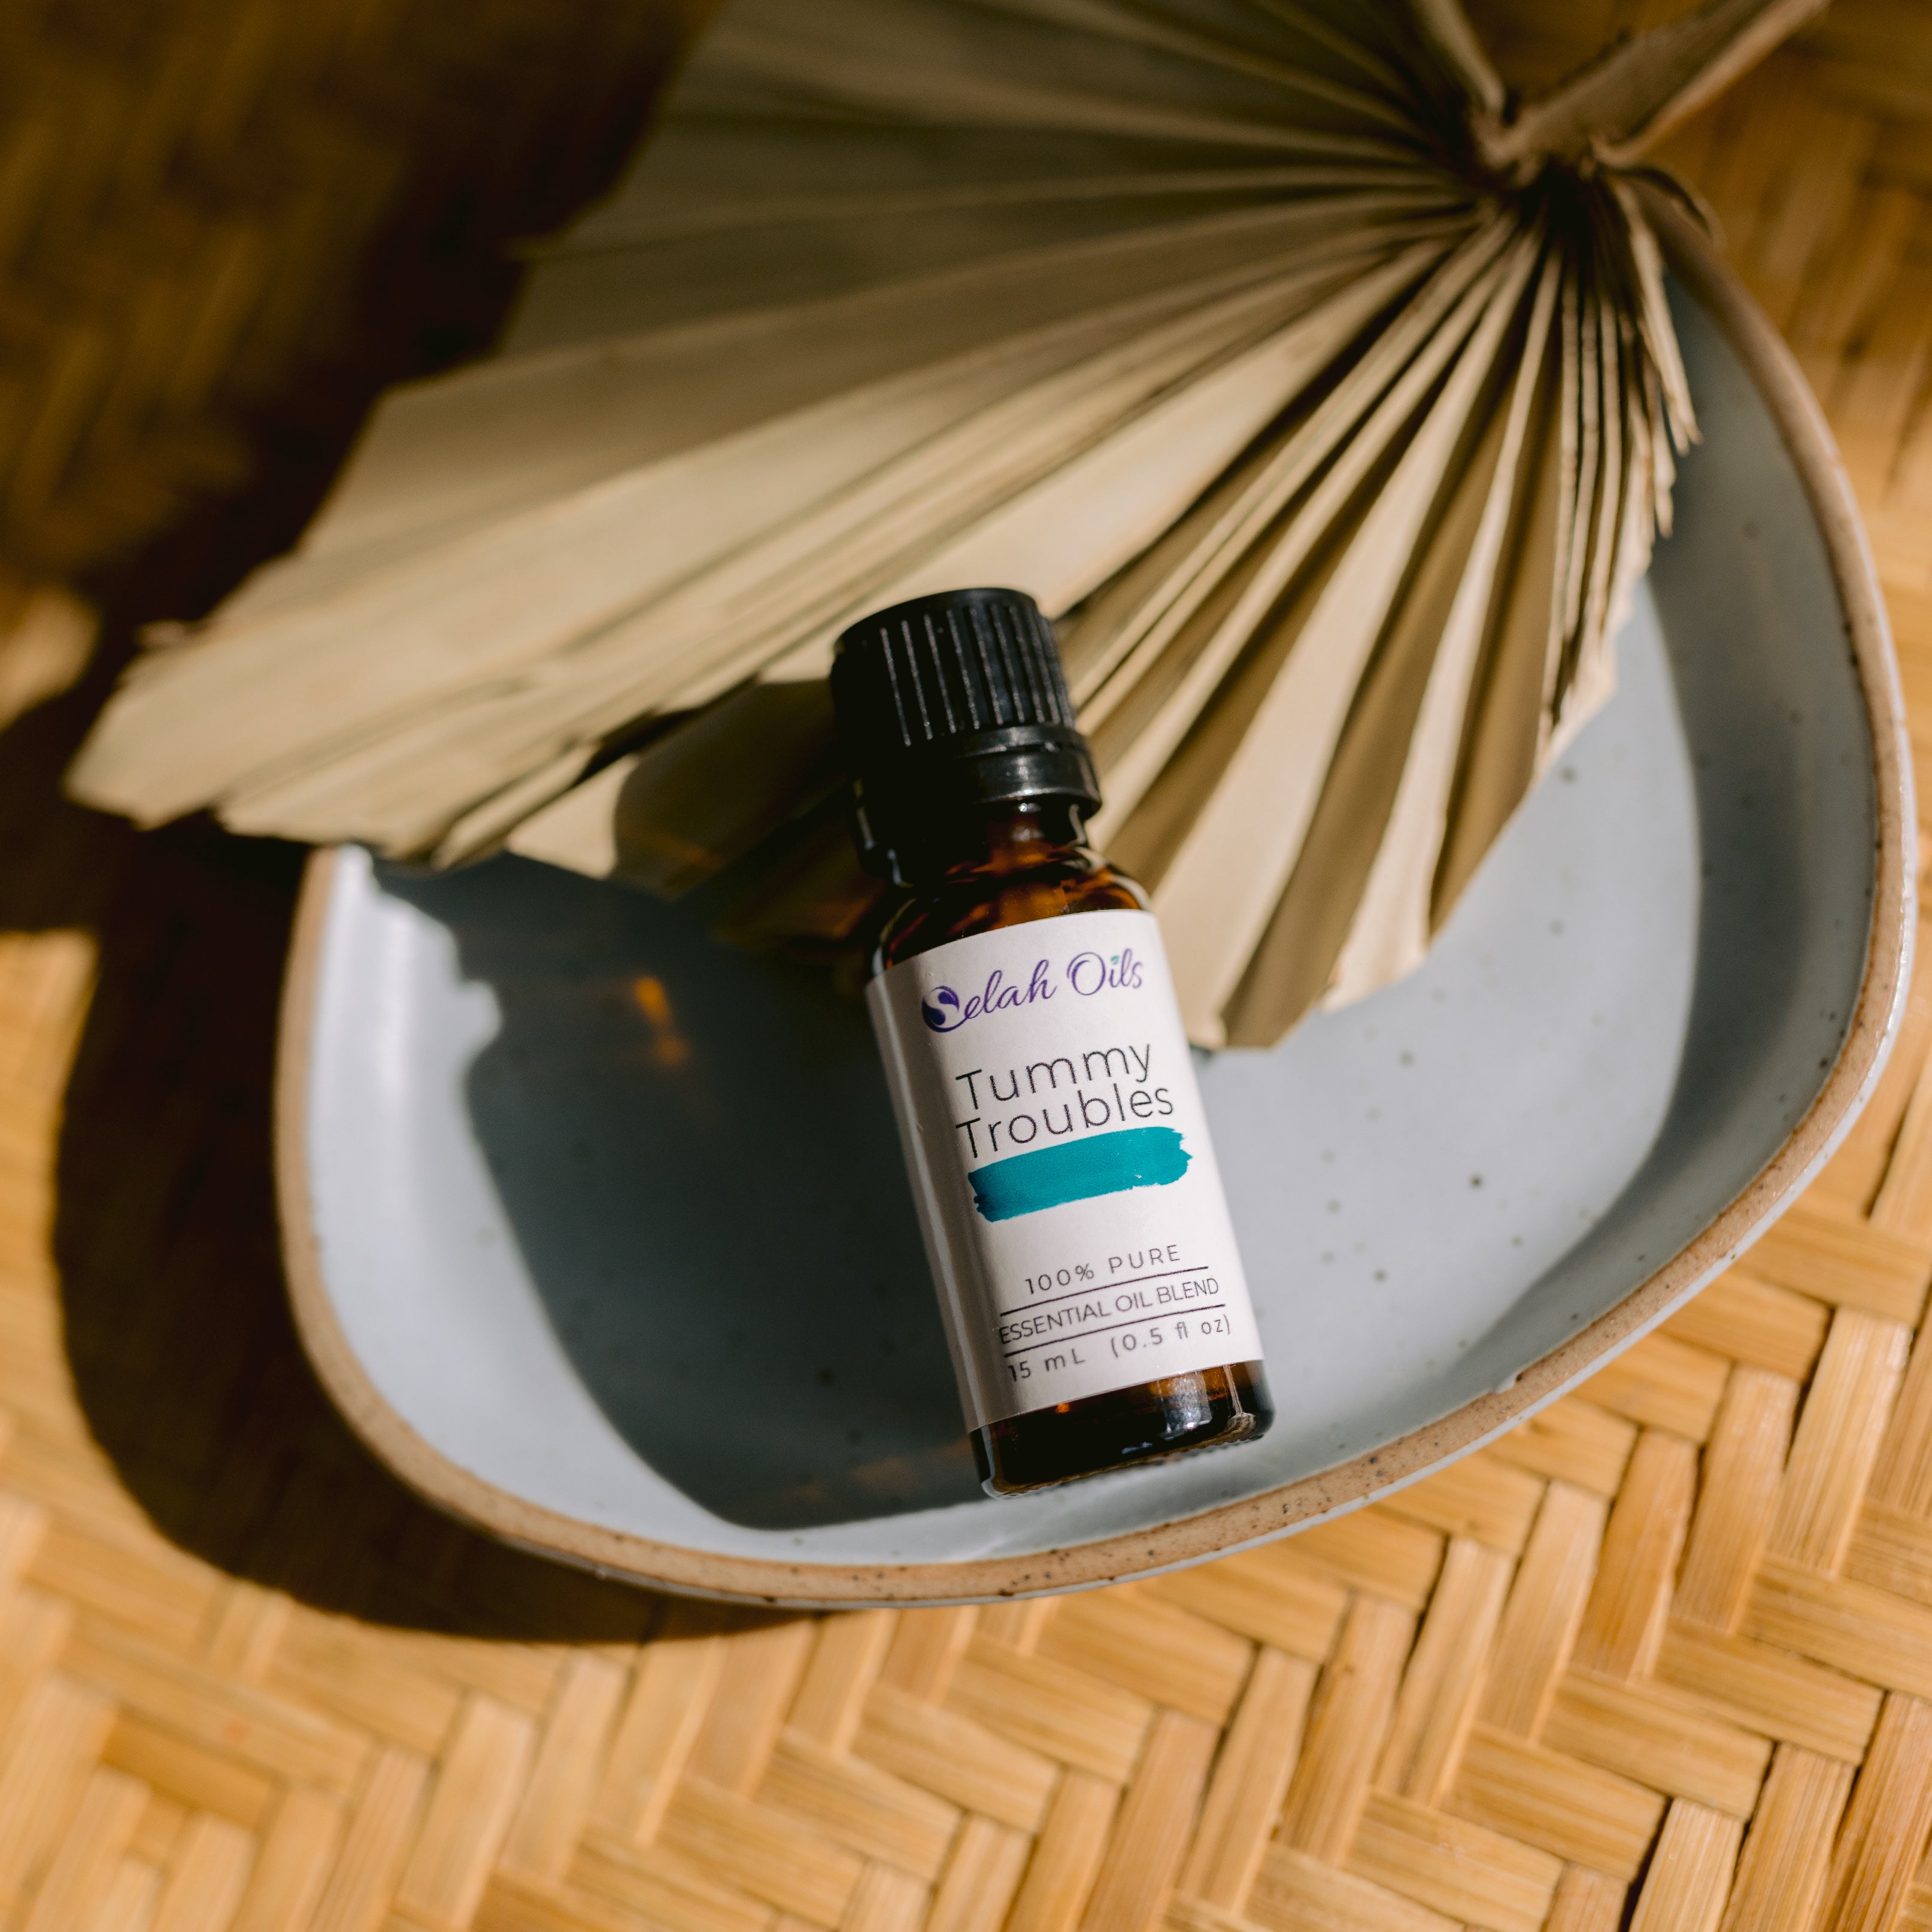 Tummy Troubles Essential Oil Blend